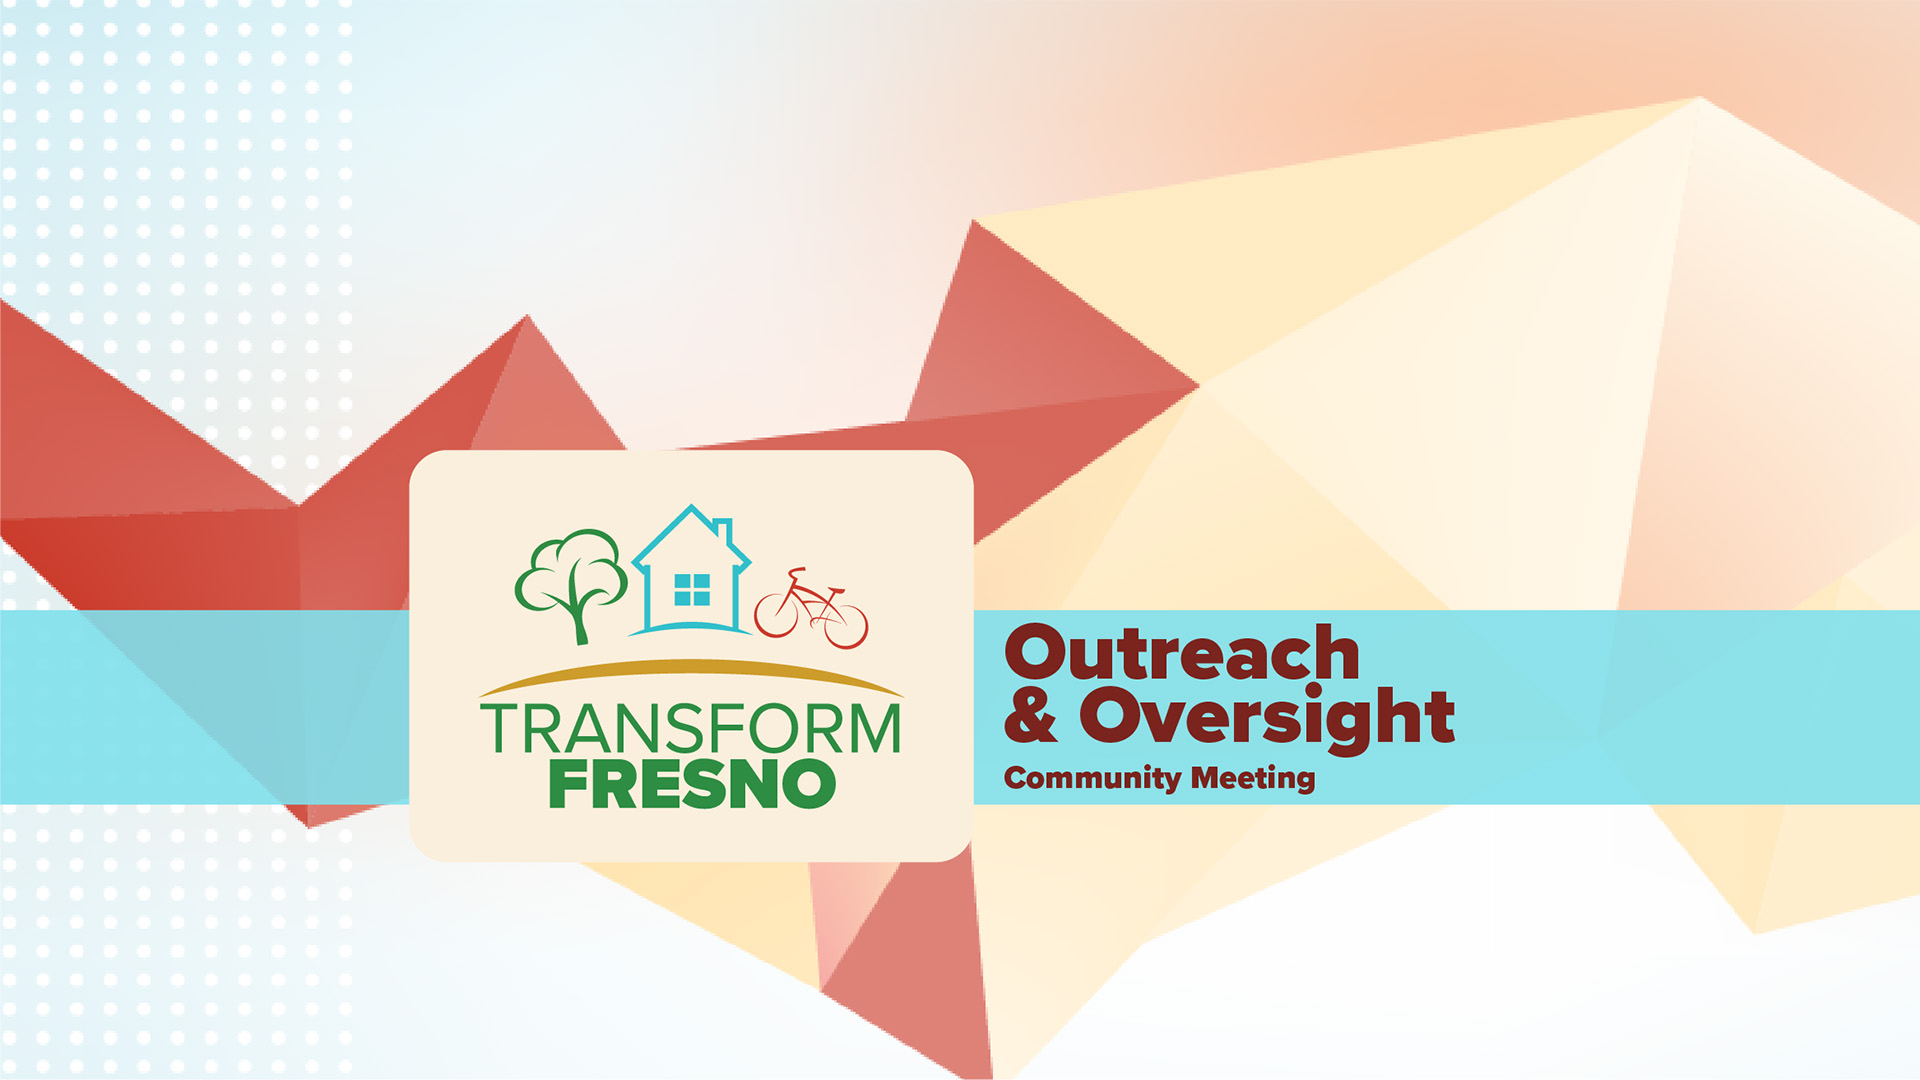 Outreach & Oversight Committee Meeting